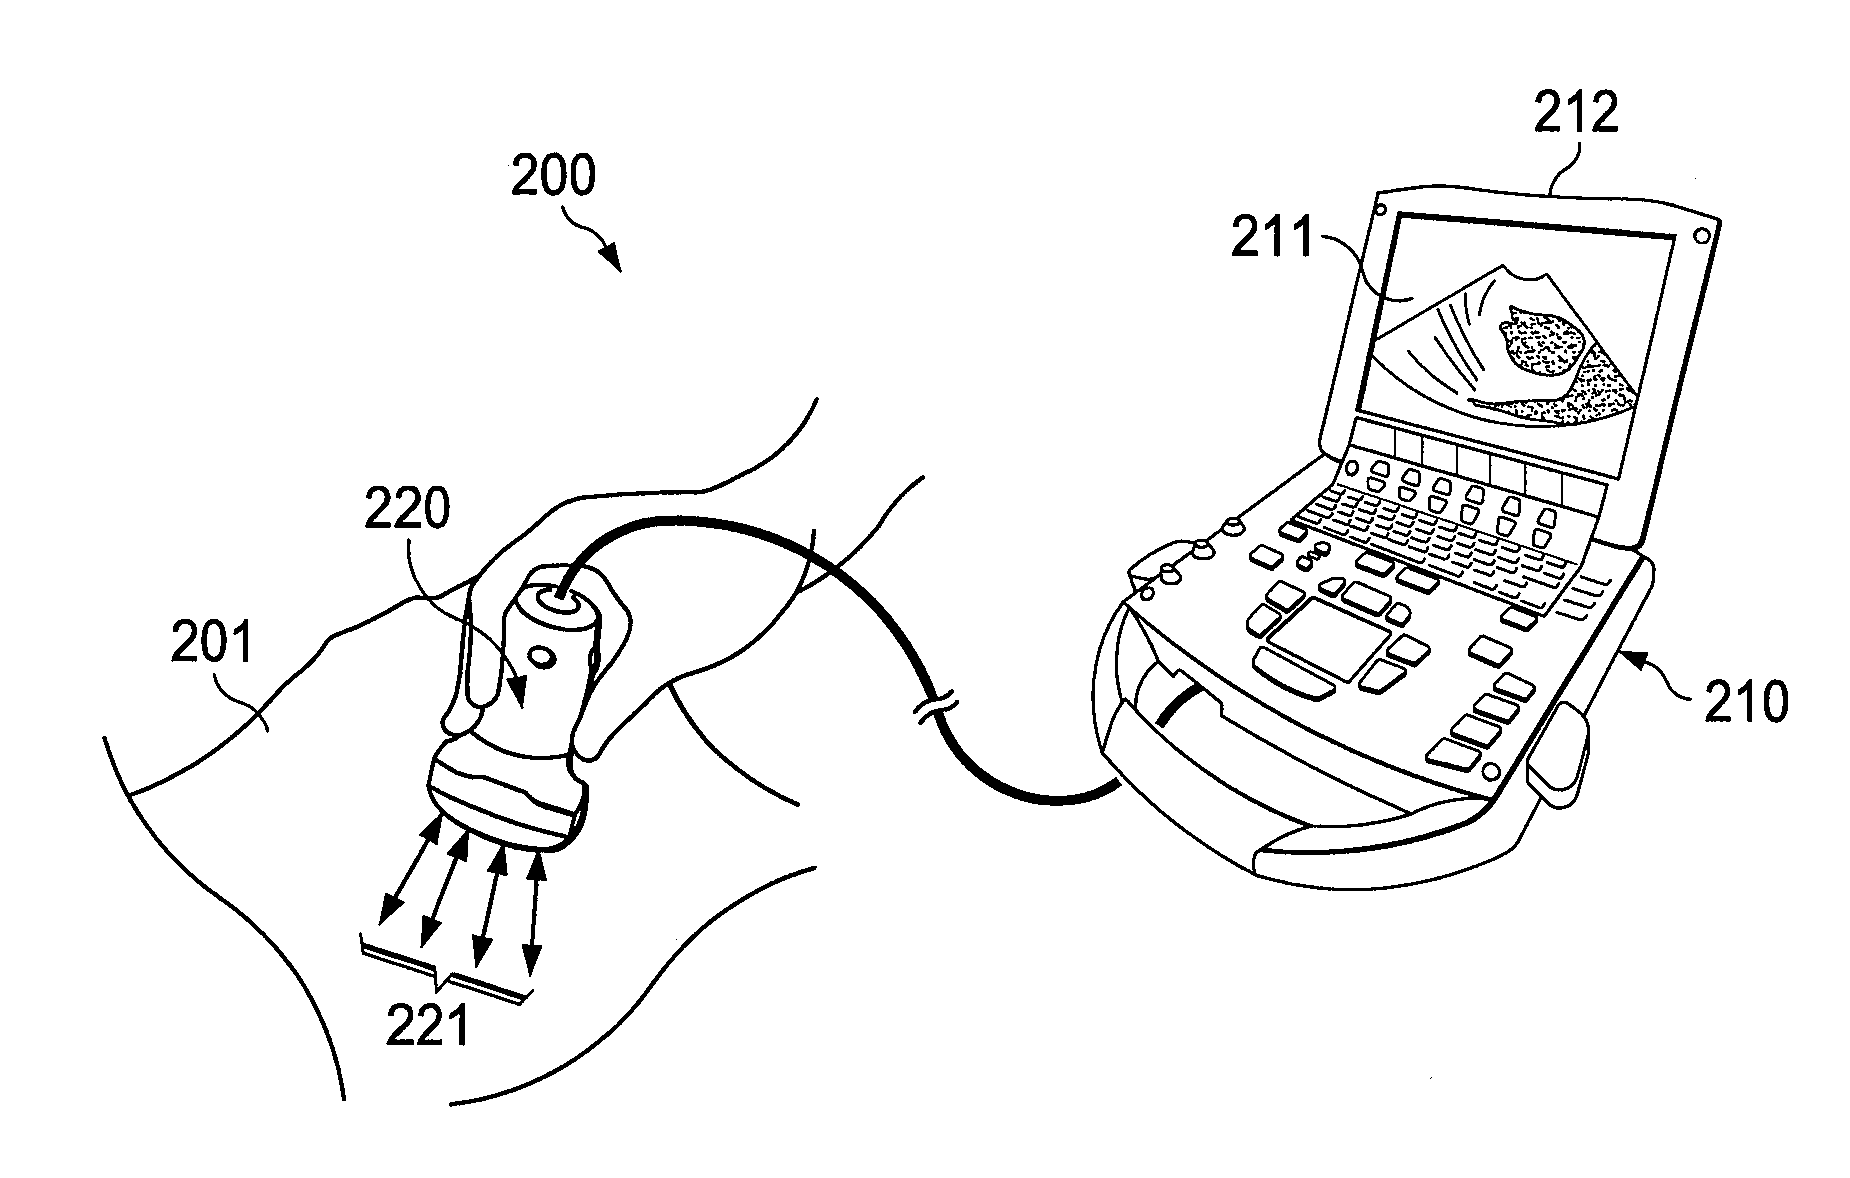 Systems and methods for beam enhancement